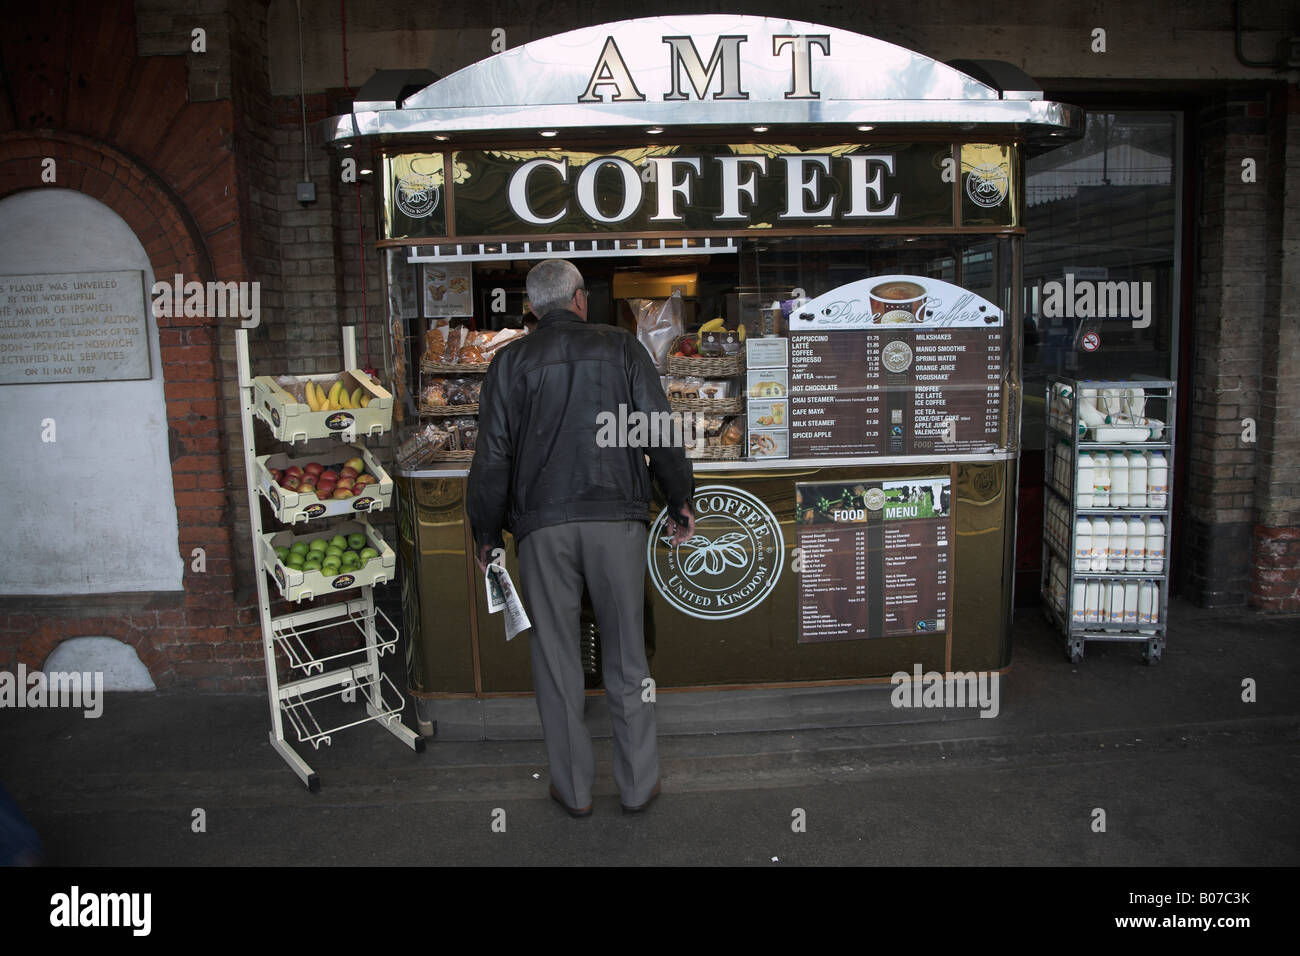 Stand café AMT Ipswich, Suffolk, Angleterre Banque D'Images